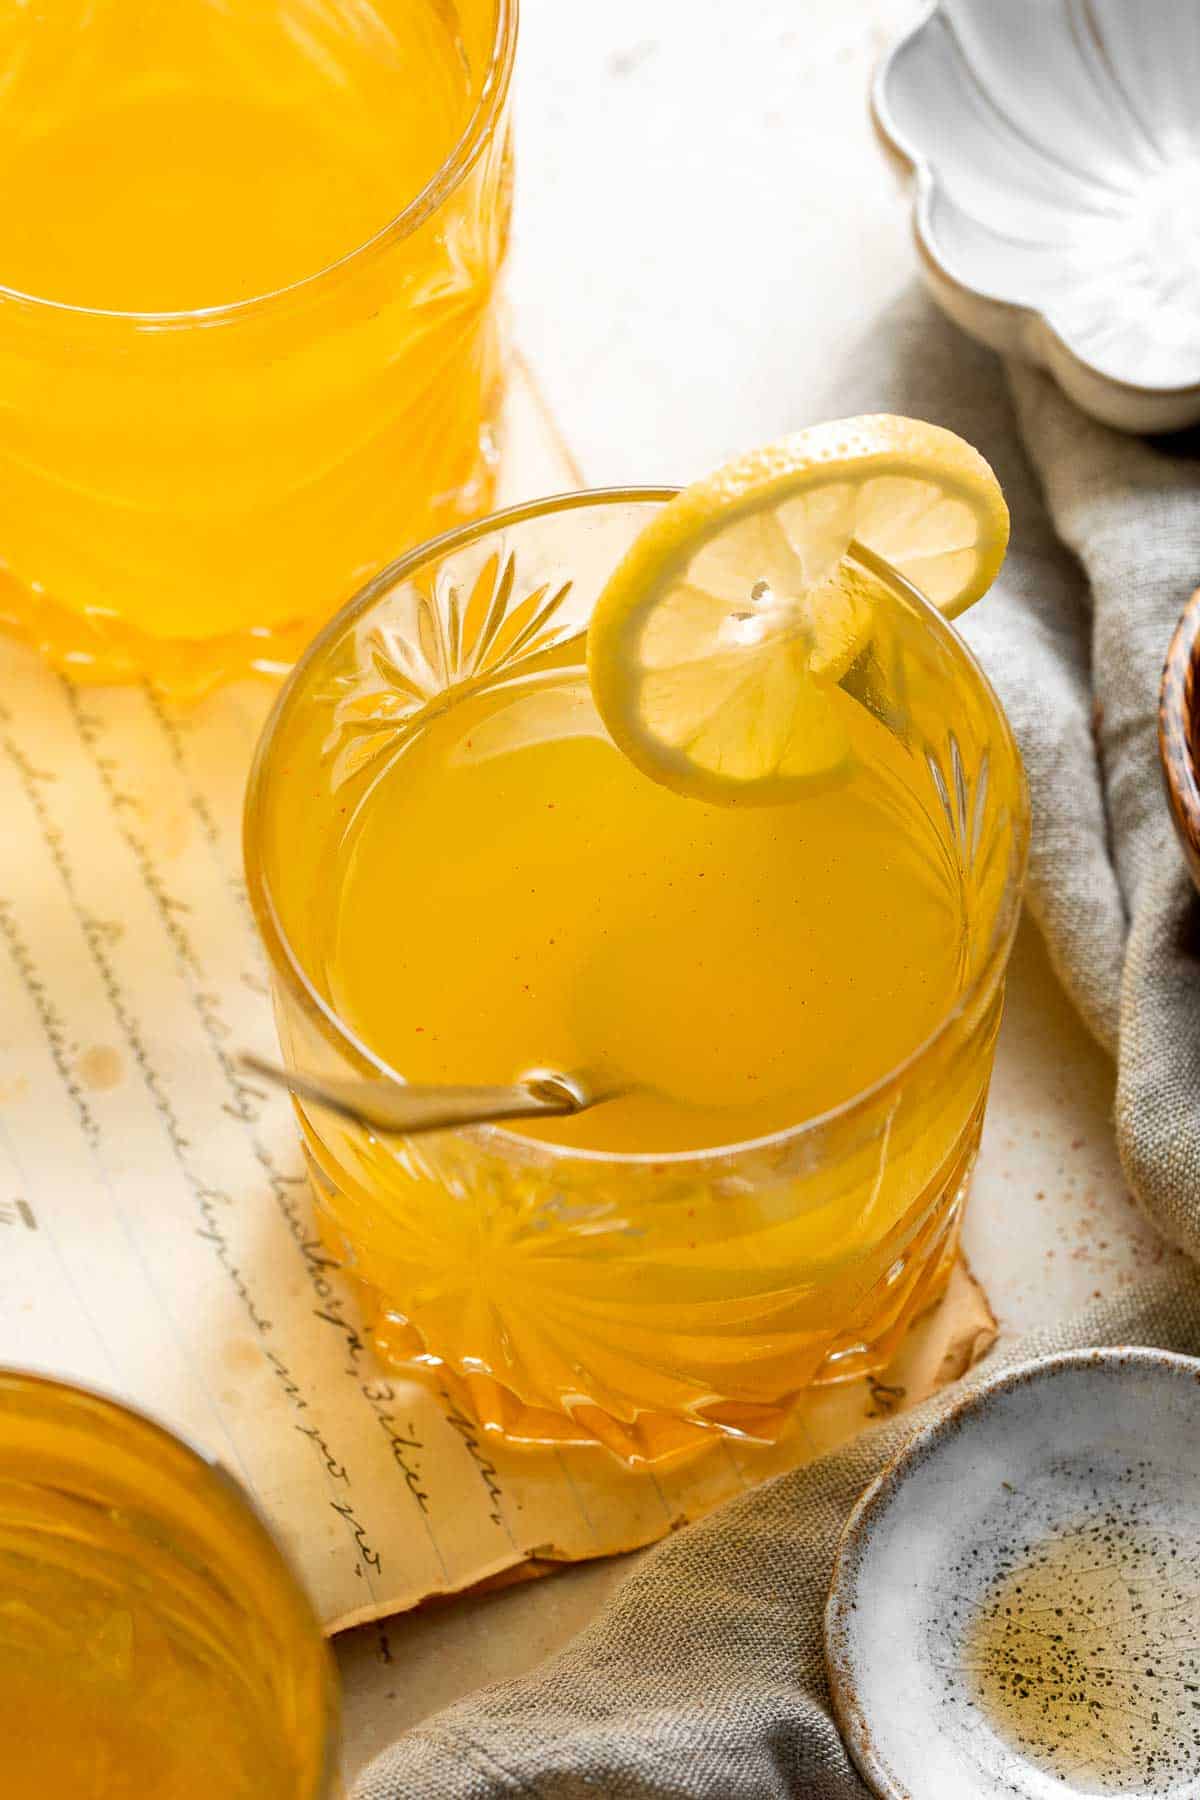 Apple Cider Vinegar Turmeric Detox Drink is a healthy way to start the day— clears toxins, aids in digestion and absorption of nutrients, and boosts energy. | aheadofthyme.com